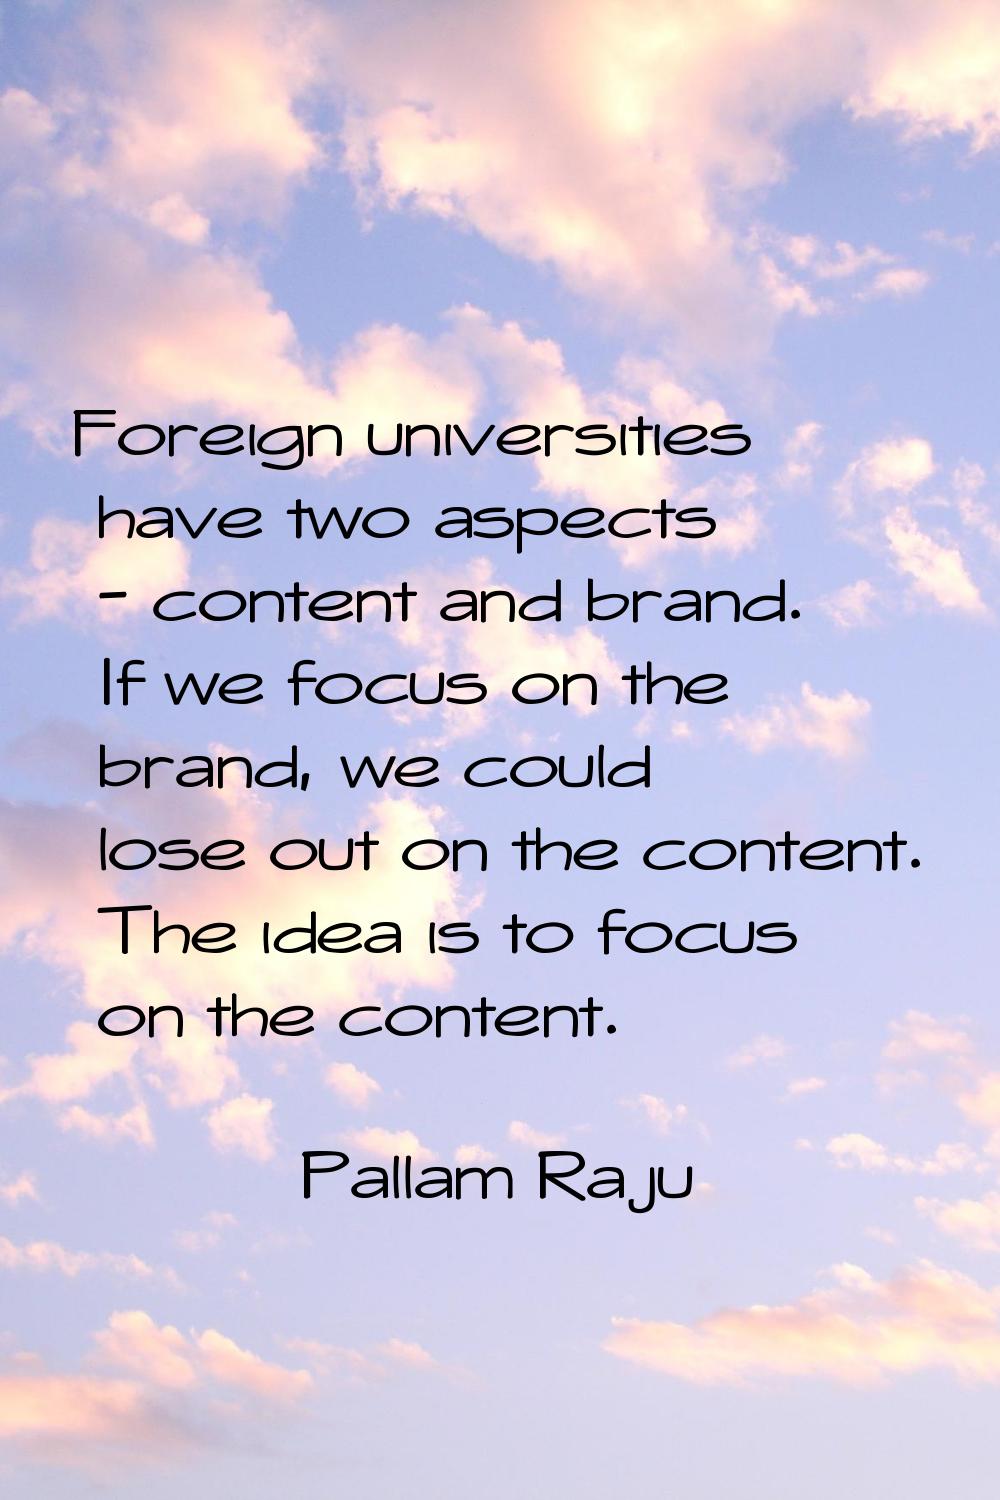 Foreign universities have two aspects - content and brand. If we focus on the brand, we could lose 